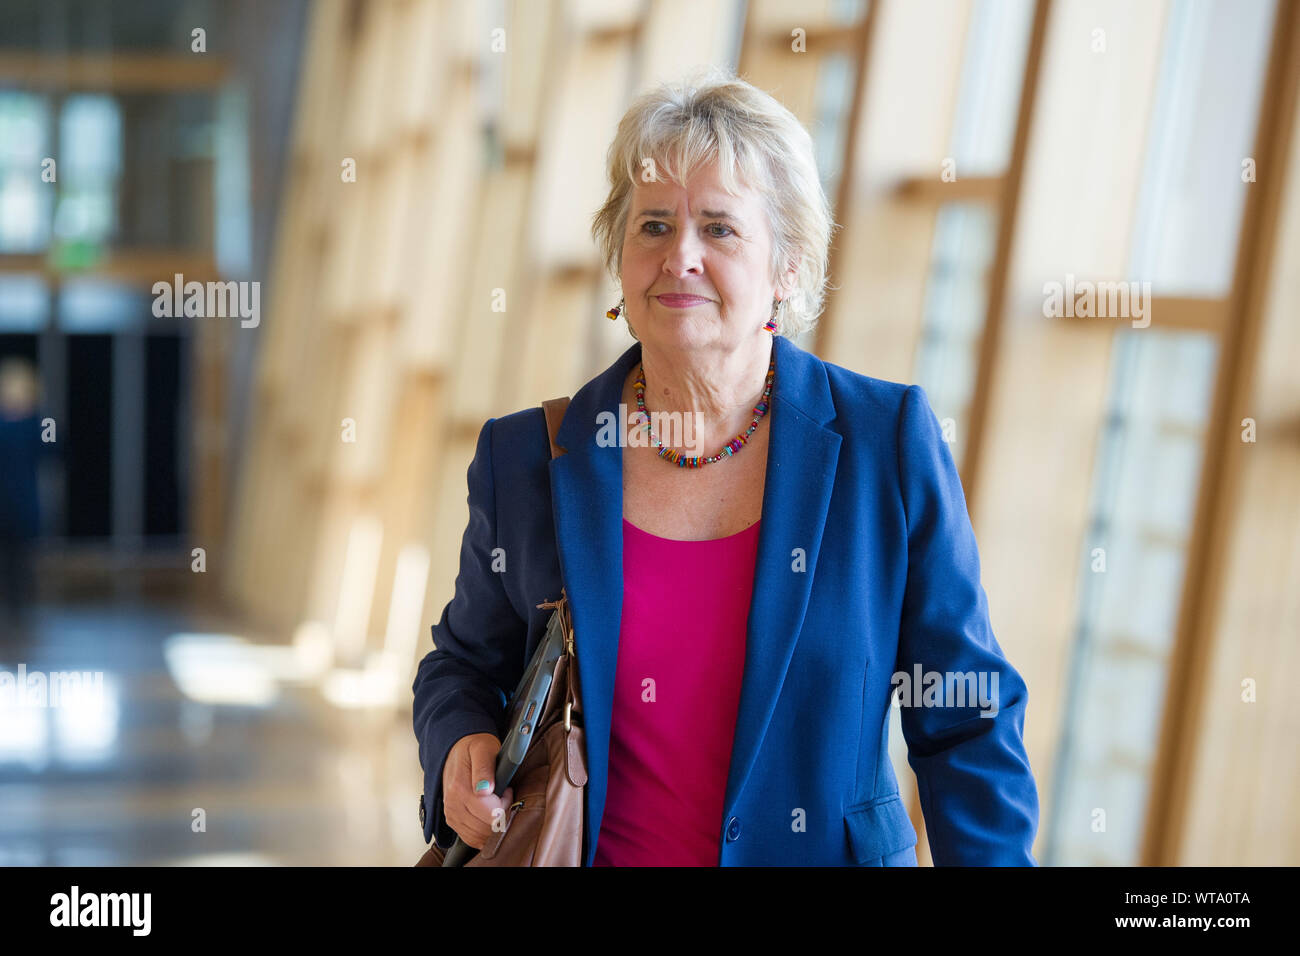 Edinburgh, UK. 5 September 2019. Pictured: Roseanna Cunningham MSP - Cabinet Secretary for Environment, Climate Change and Land Reform. Scenes from Holyrood before First Ministers Questions returns to the chamber after the summer recess.  Colin Fisher/CDFIMAGES.COM Stock Photo